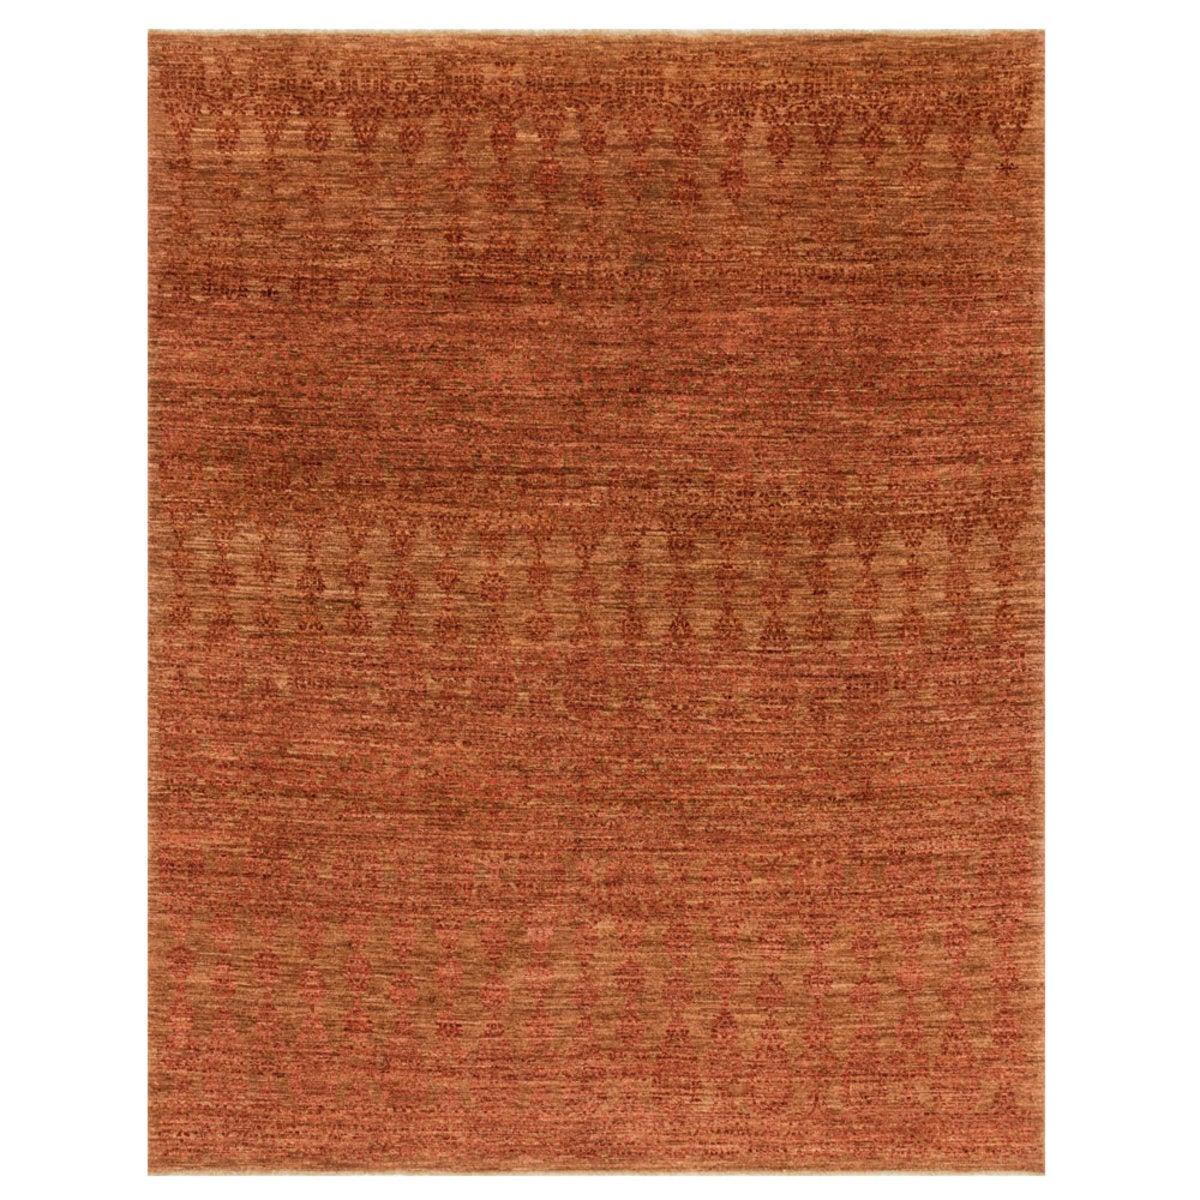 Loloi Essex Fading Arabesque Rug in Ivory - 4' x 6' - Paprika